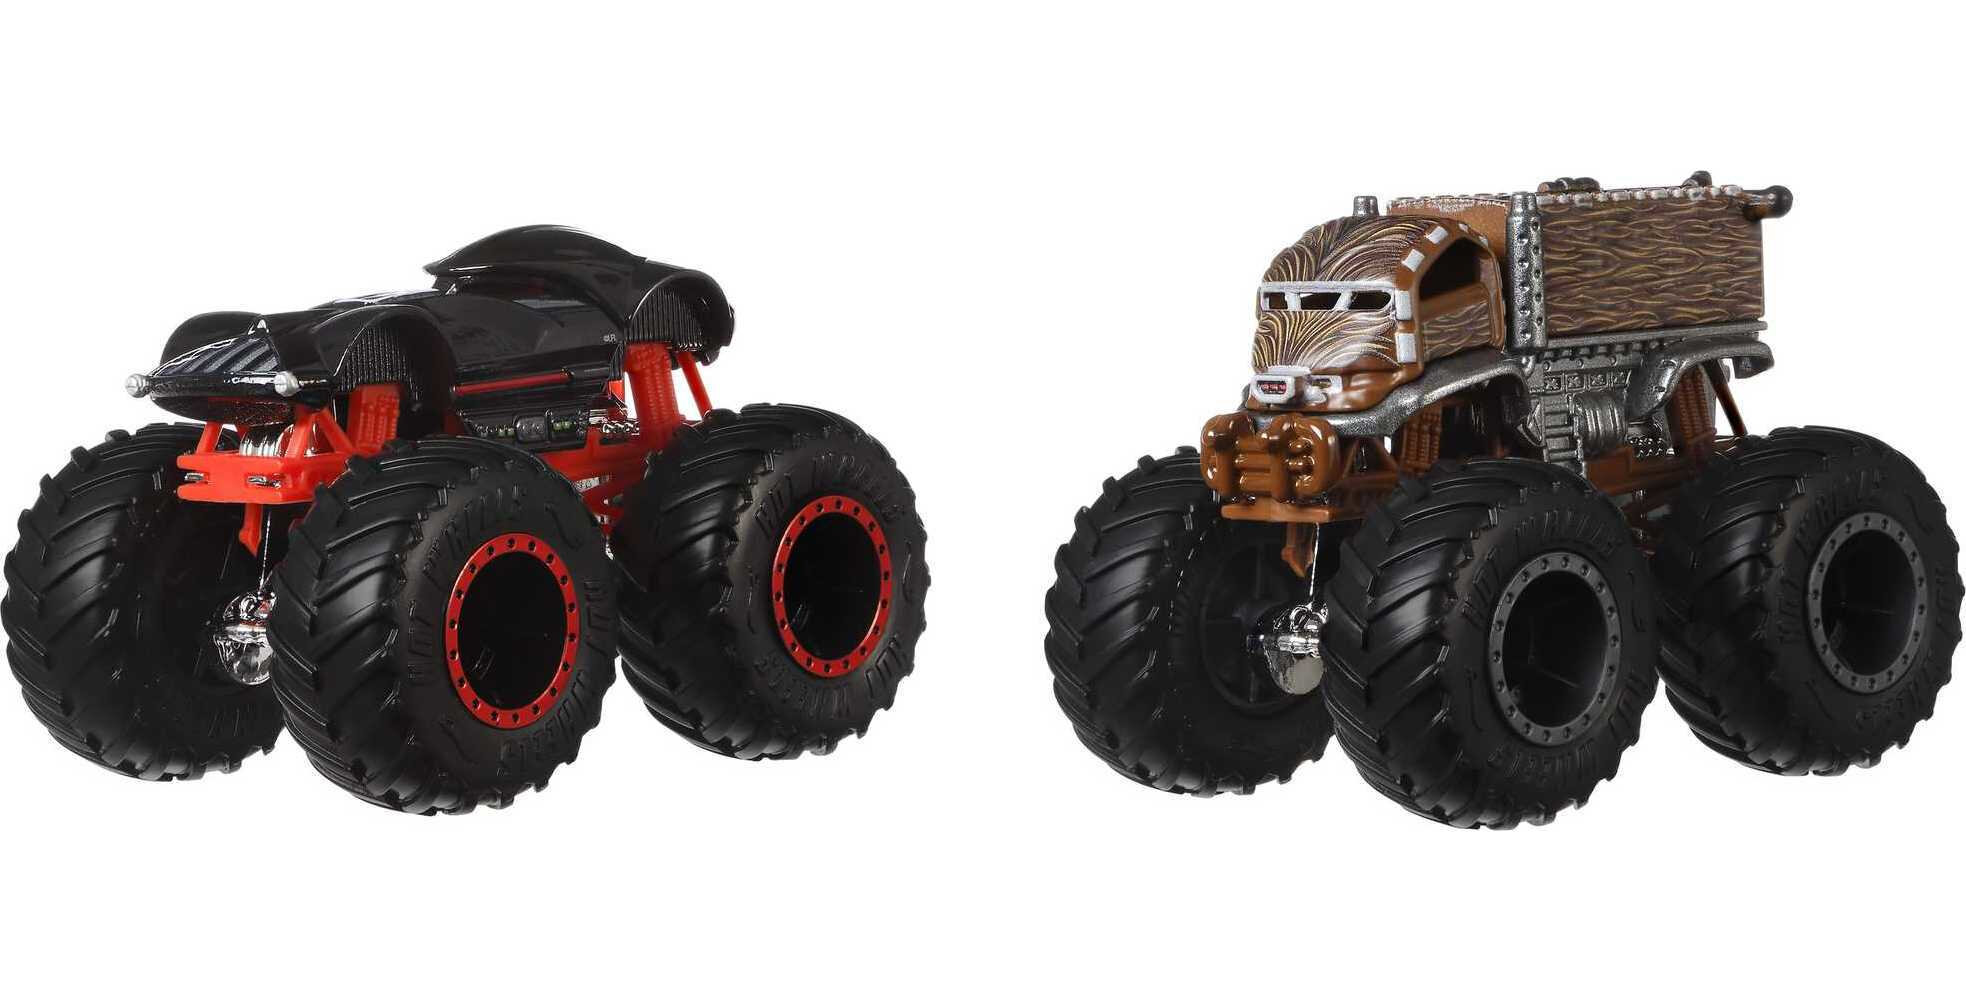 Hot Wheels Monster Trucks Demolition Doubles, Set of 2 Toy Trucks (Styles May Vary) - image 5 of 6